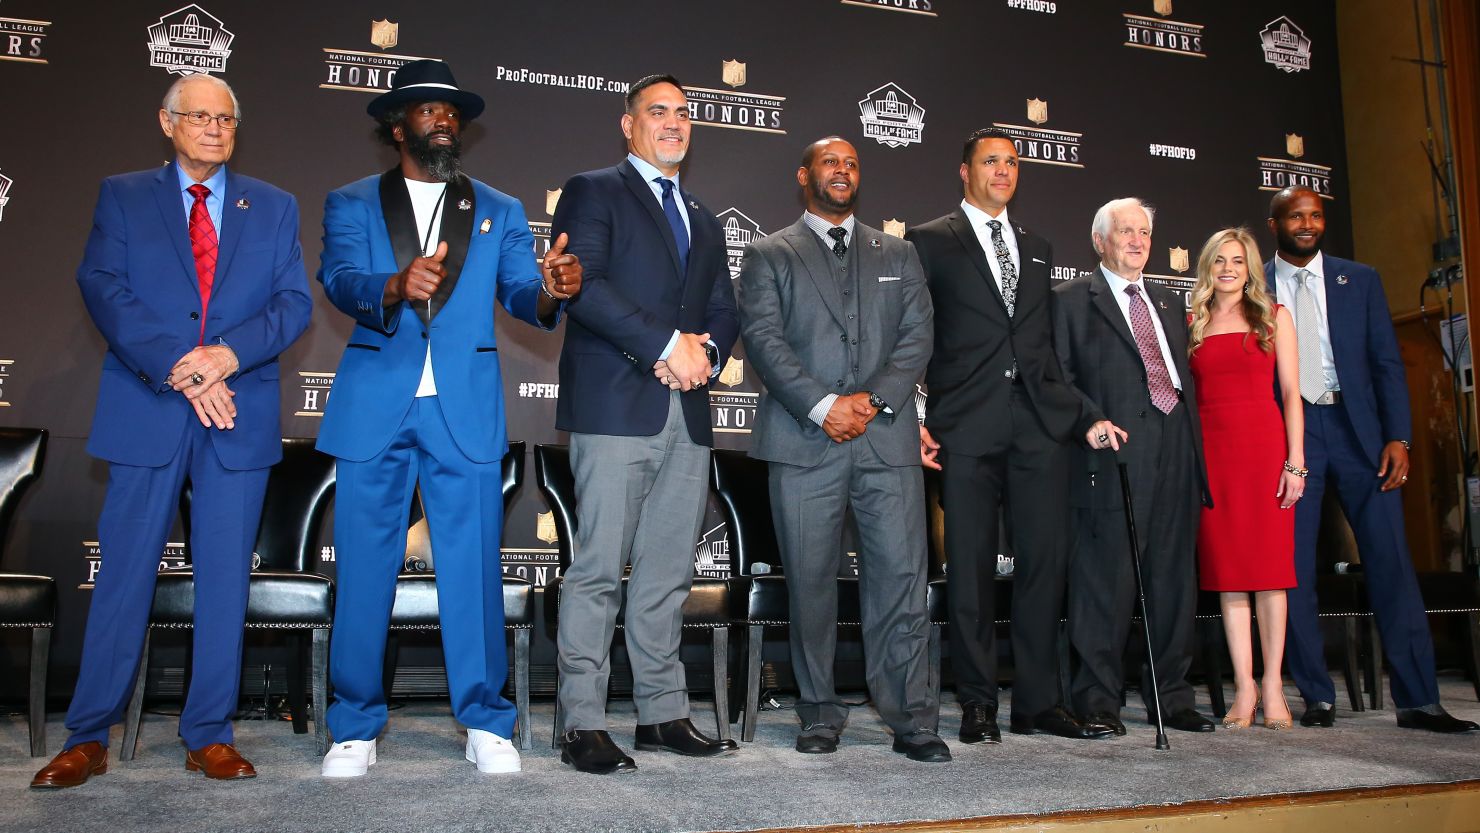 The 2019 Pro Football Hall of Fame class pose for a photo. From left to right: Johnny Robinson, Ed Reed, Kevin Mawae, Ty Law, Tony Gonzalez, Gil Brandt, Annabel Bowlen for Pat Bowlen and Champ Bailey.